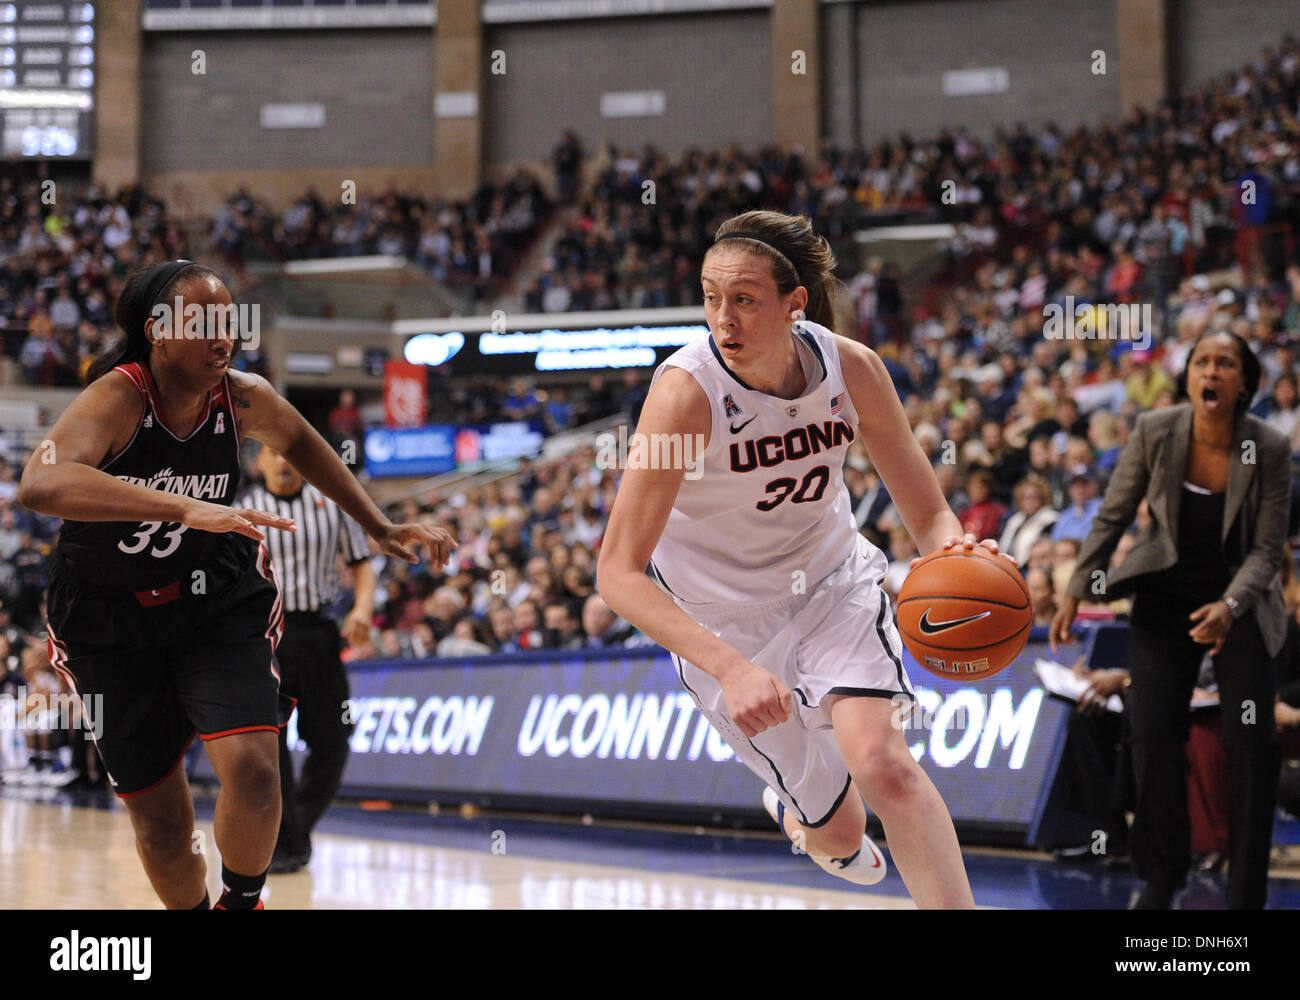 Storrs, CT, USA. 29th Dec, 2013. Sunday December 29, 2013: UConn huskies guard-forward Breanna Stewart (30) drives to the basket against Cincinnati Bearcats forward Jeanise Randolph (33) during the 1st half of the womens NCAA basketball game between Cincinnati and Connecticut at Gampel Pavilion in Storrs, CT. Bill Shettle / Cal Sport Media. © csm/Alamy Live News Stock Photo